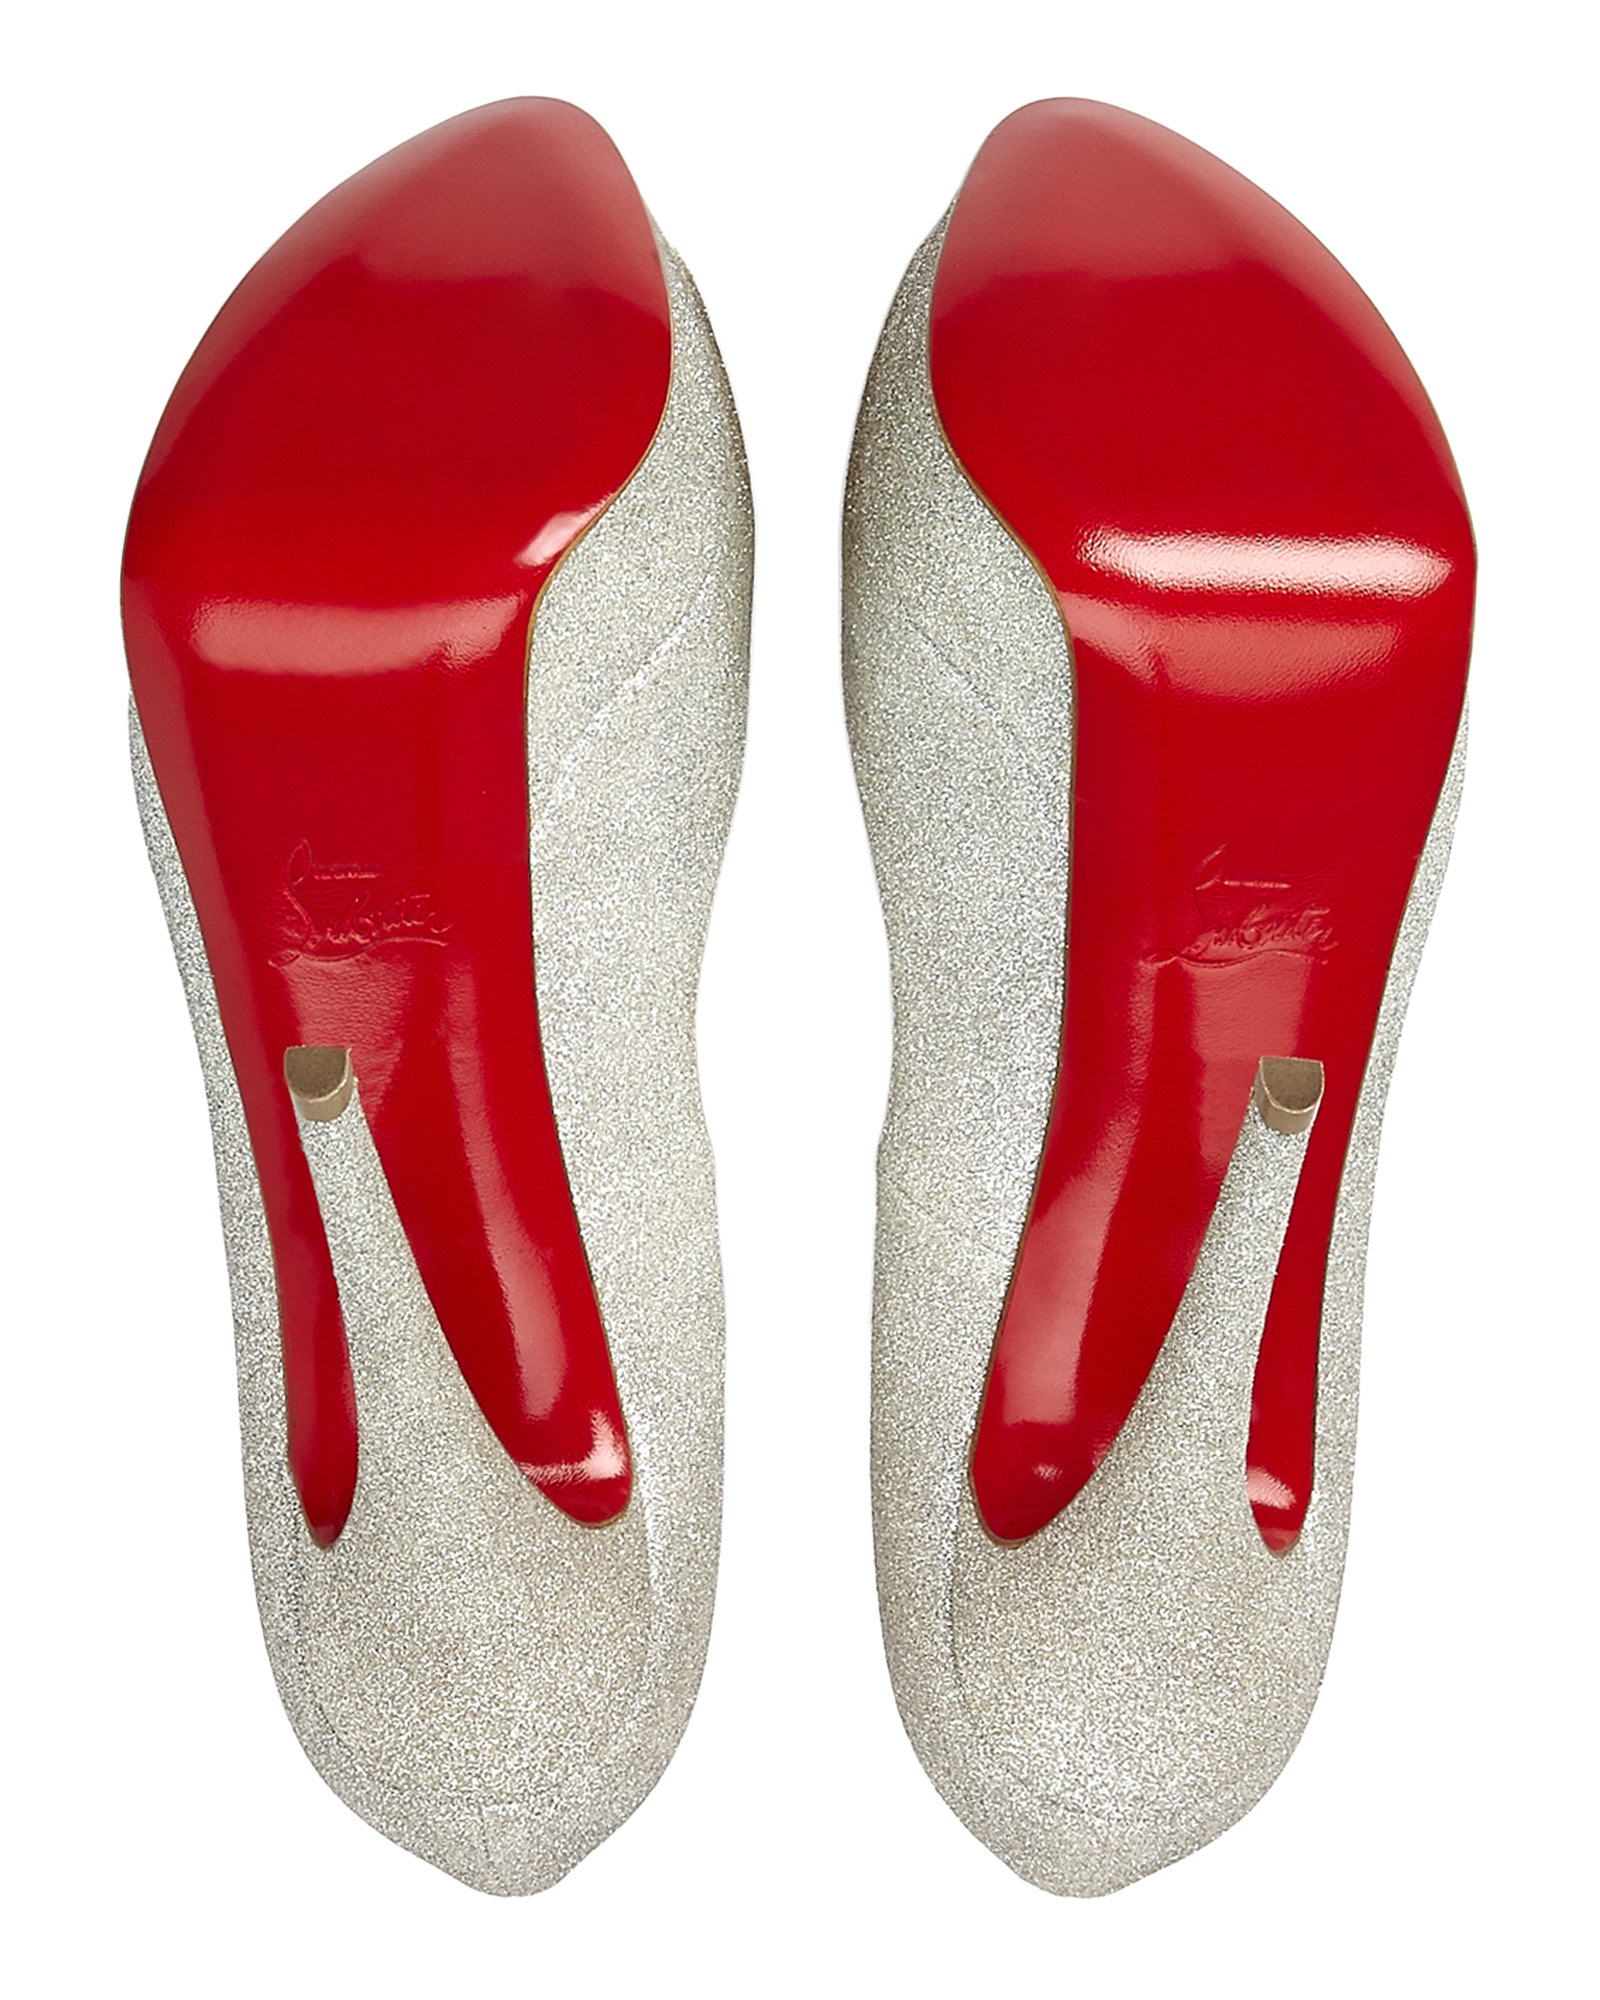 louis vuitton red bottom shoes price - Christian louboutin Lady Peep Glitter Platform Pumps in White | Lyst